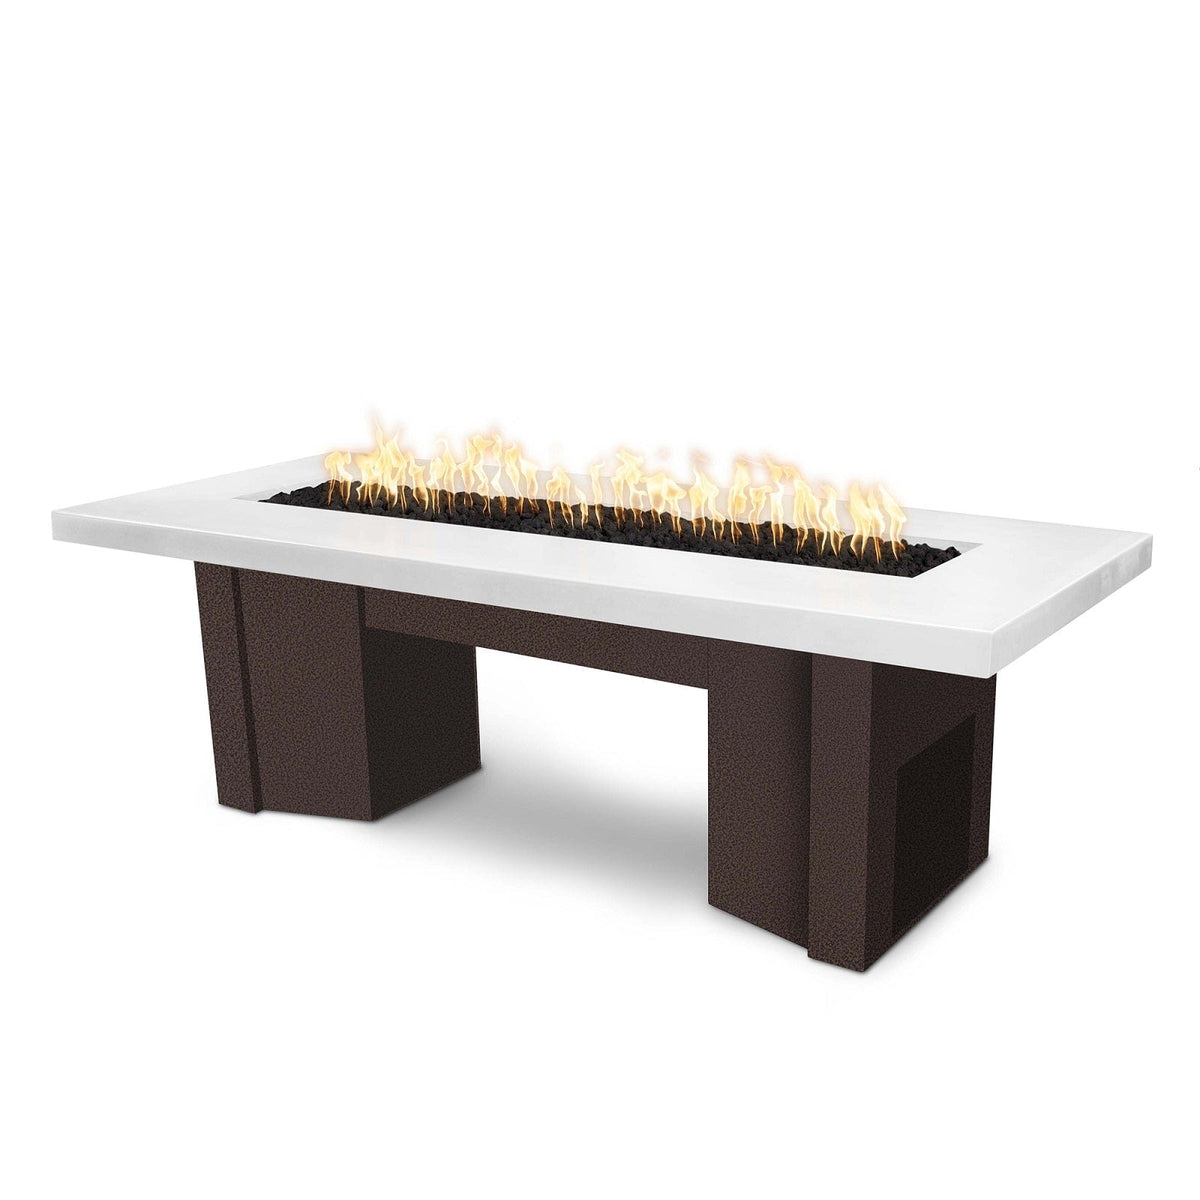 The Outdoor Plus Fire Features Limestone (-LIM) / Copper Vein Powder Coated Steel (-CPV) The Outdoor Plus 60&quot; Alameda Fire Table Smooth Concrete in Liquid Propane - 110V Plug &amp; Play Electronic Ignition / OPT-ALMGFRC60EKIT-LP